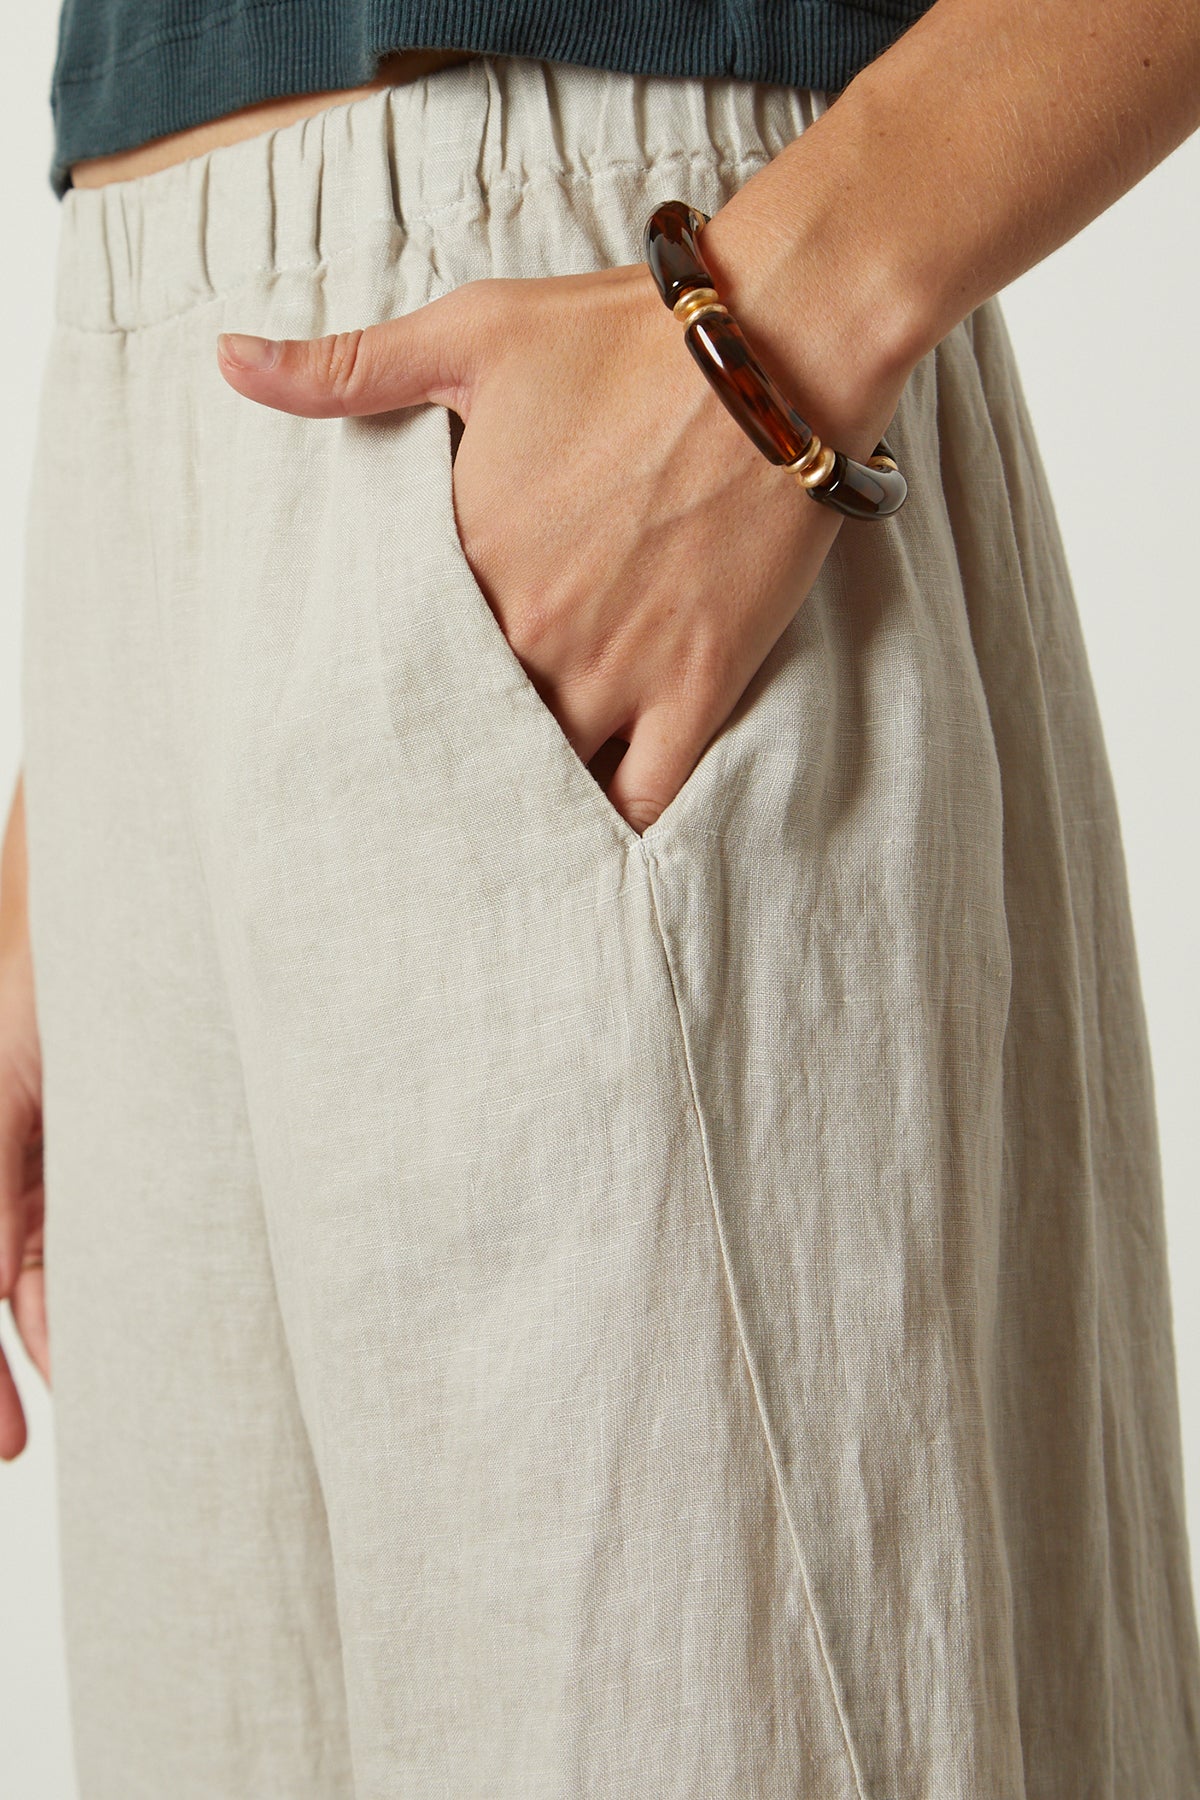   Lola linen pant in cobble front and pocket close up detail 